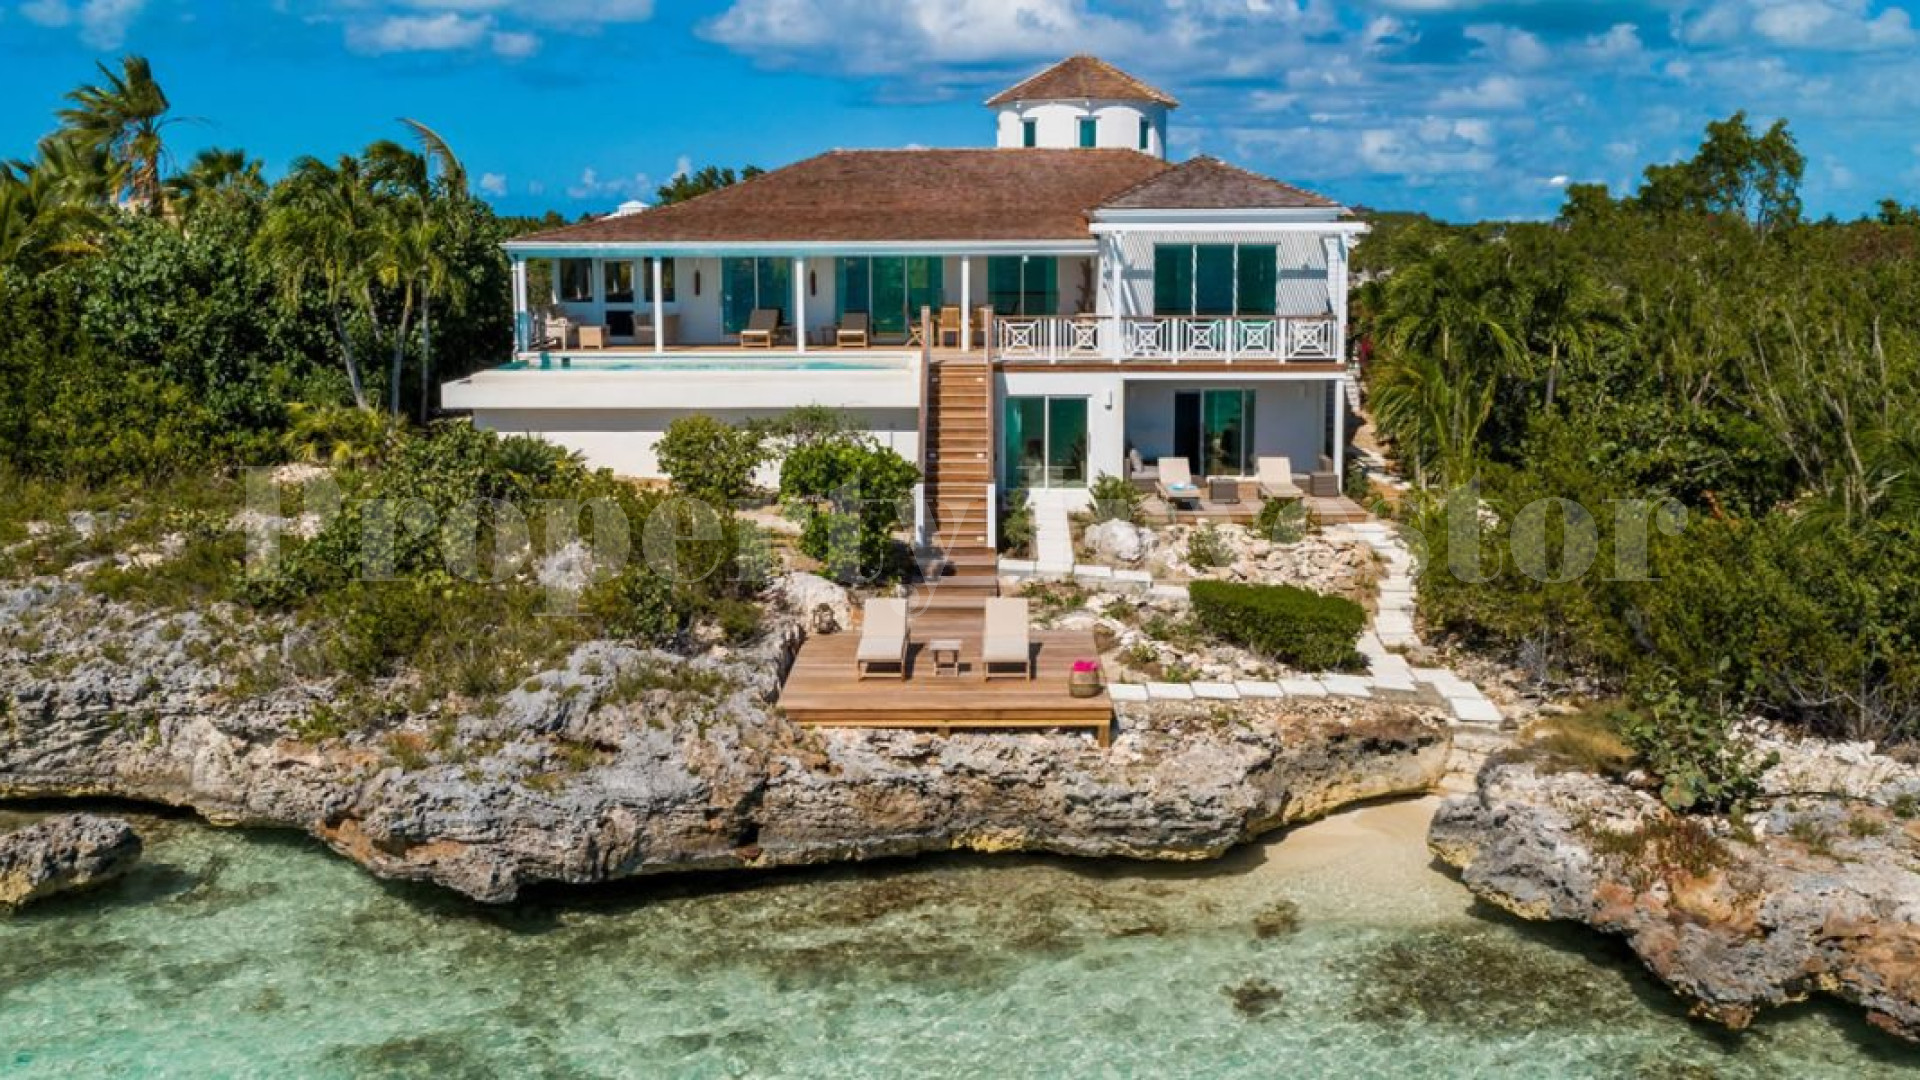 Upscale 4 Bedroom Caribbean Style Oceanfront Villa for Sale in Turks & Caicos